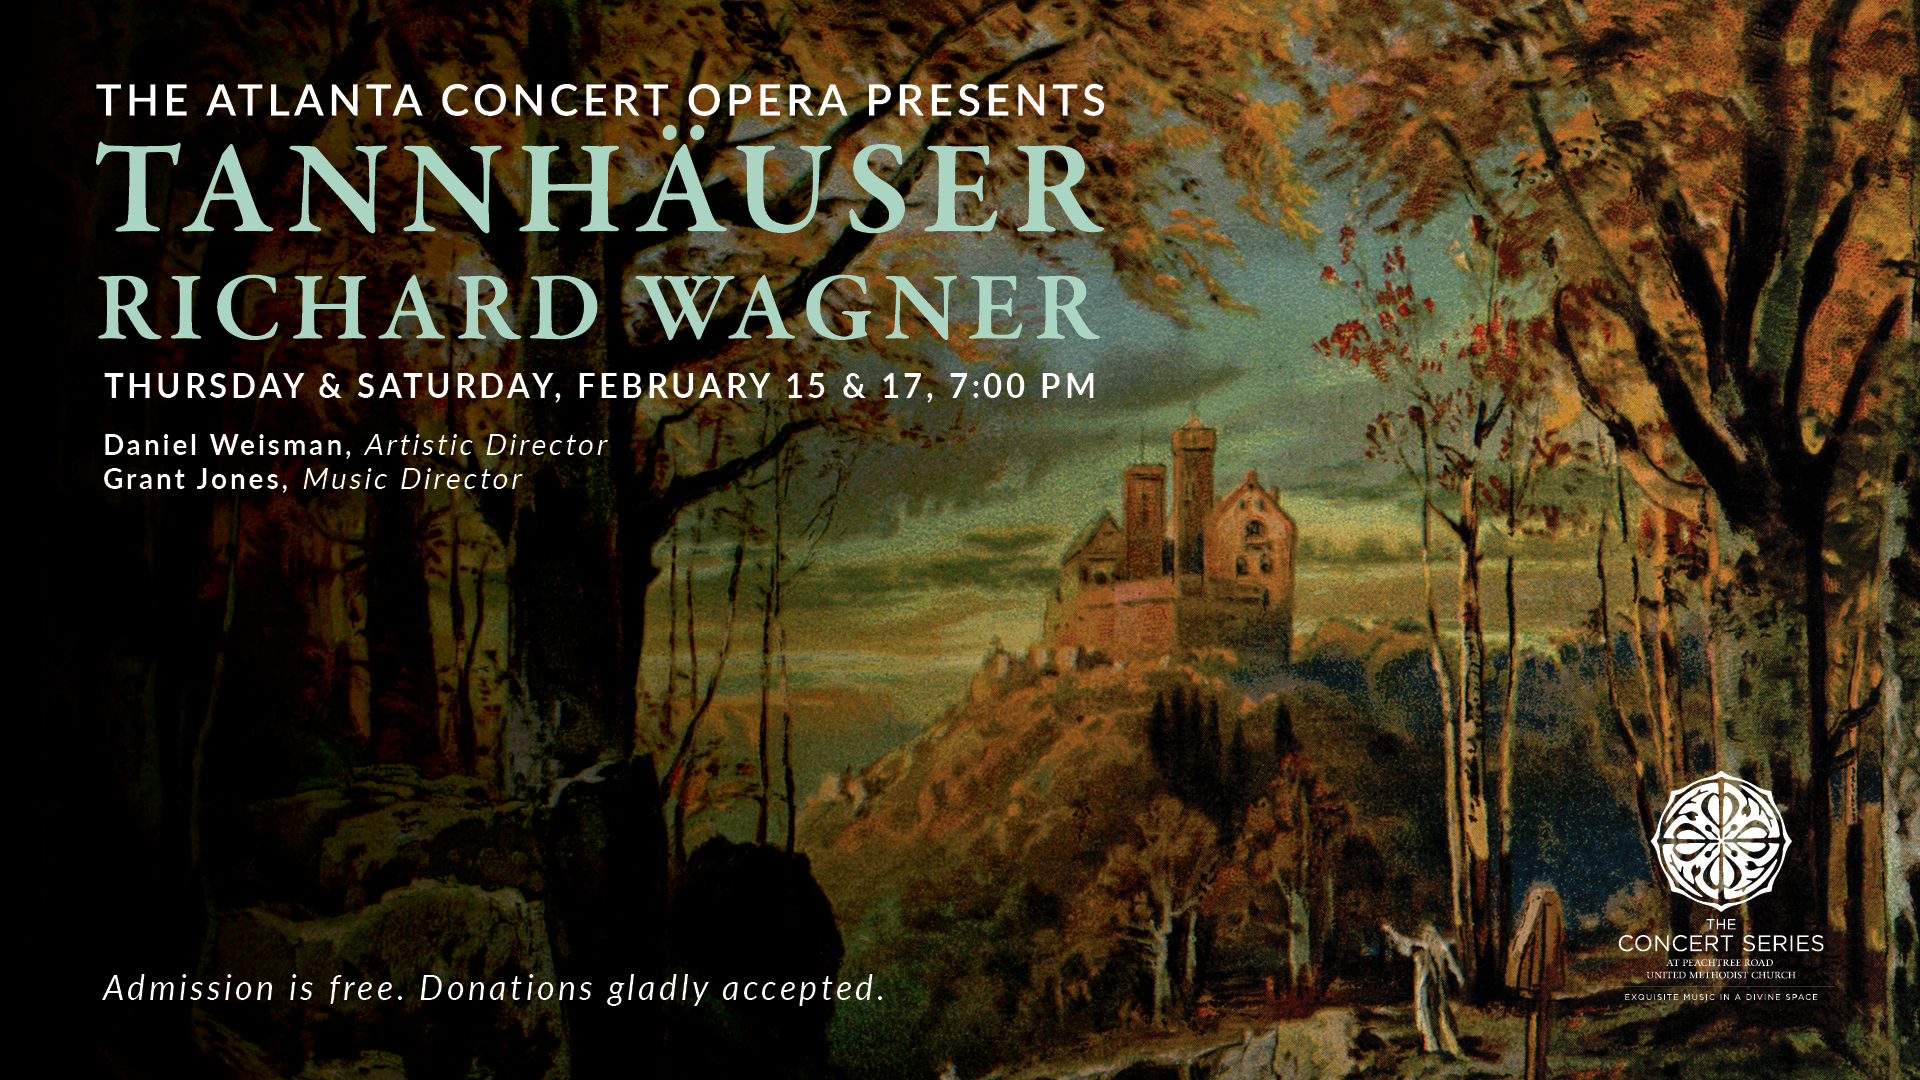 PRUMC Music and Arts presents the opera Tannhauser in collaboration with the Atlanta Concert Opera.